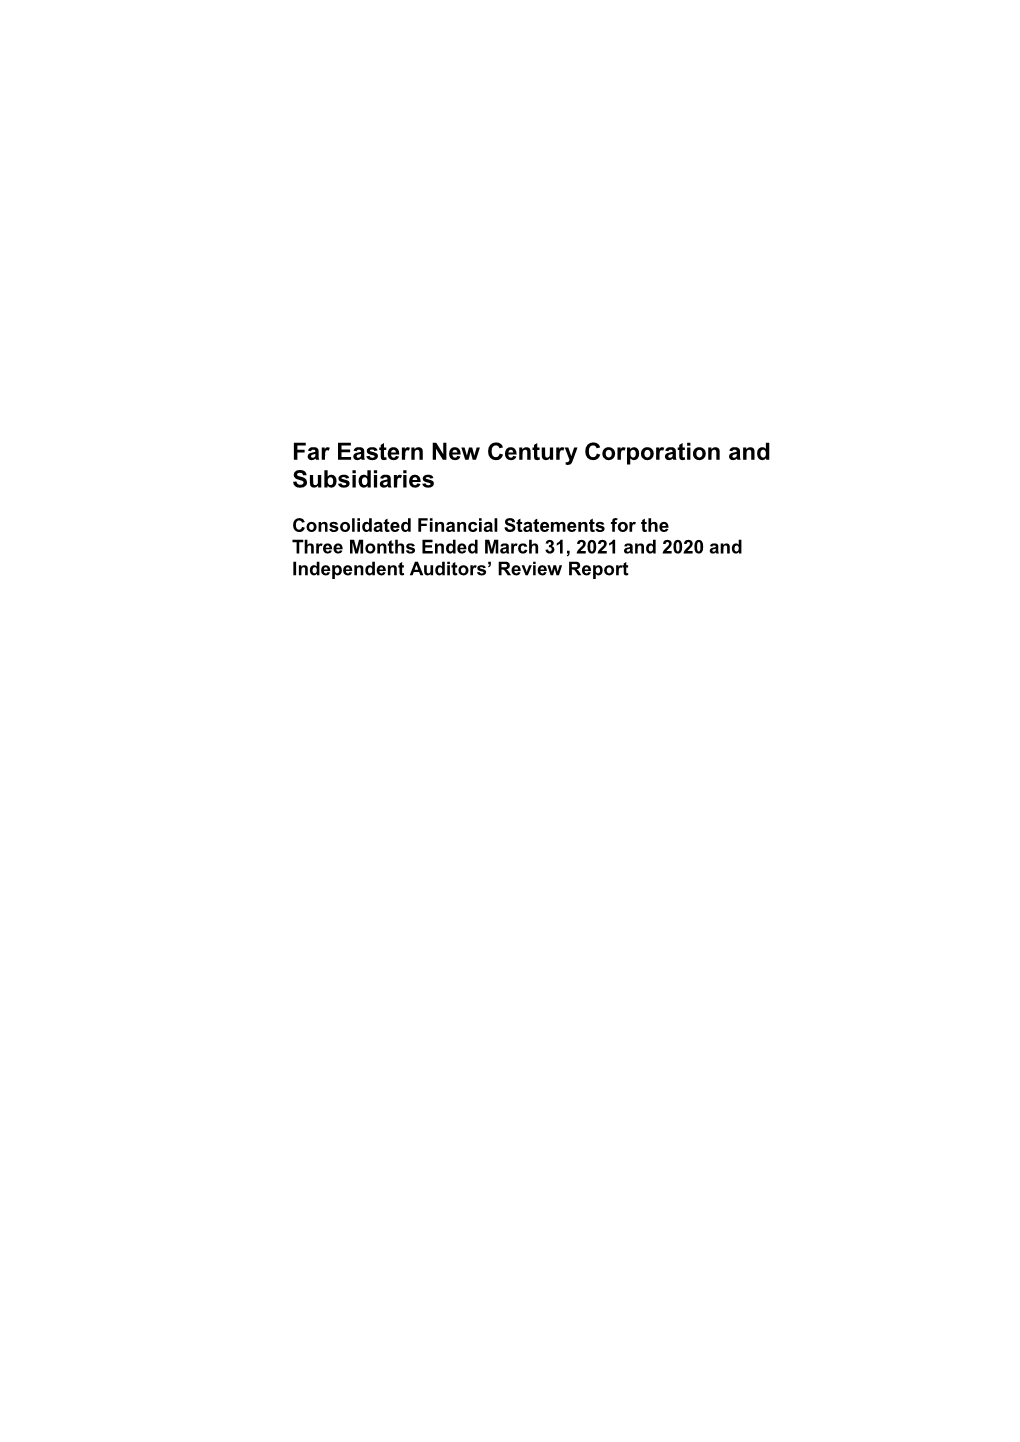 Far Eastern New Century Corporation and Subsidiaries